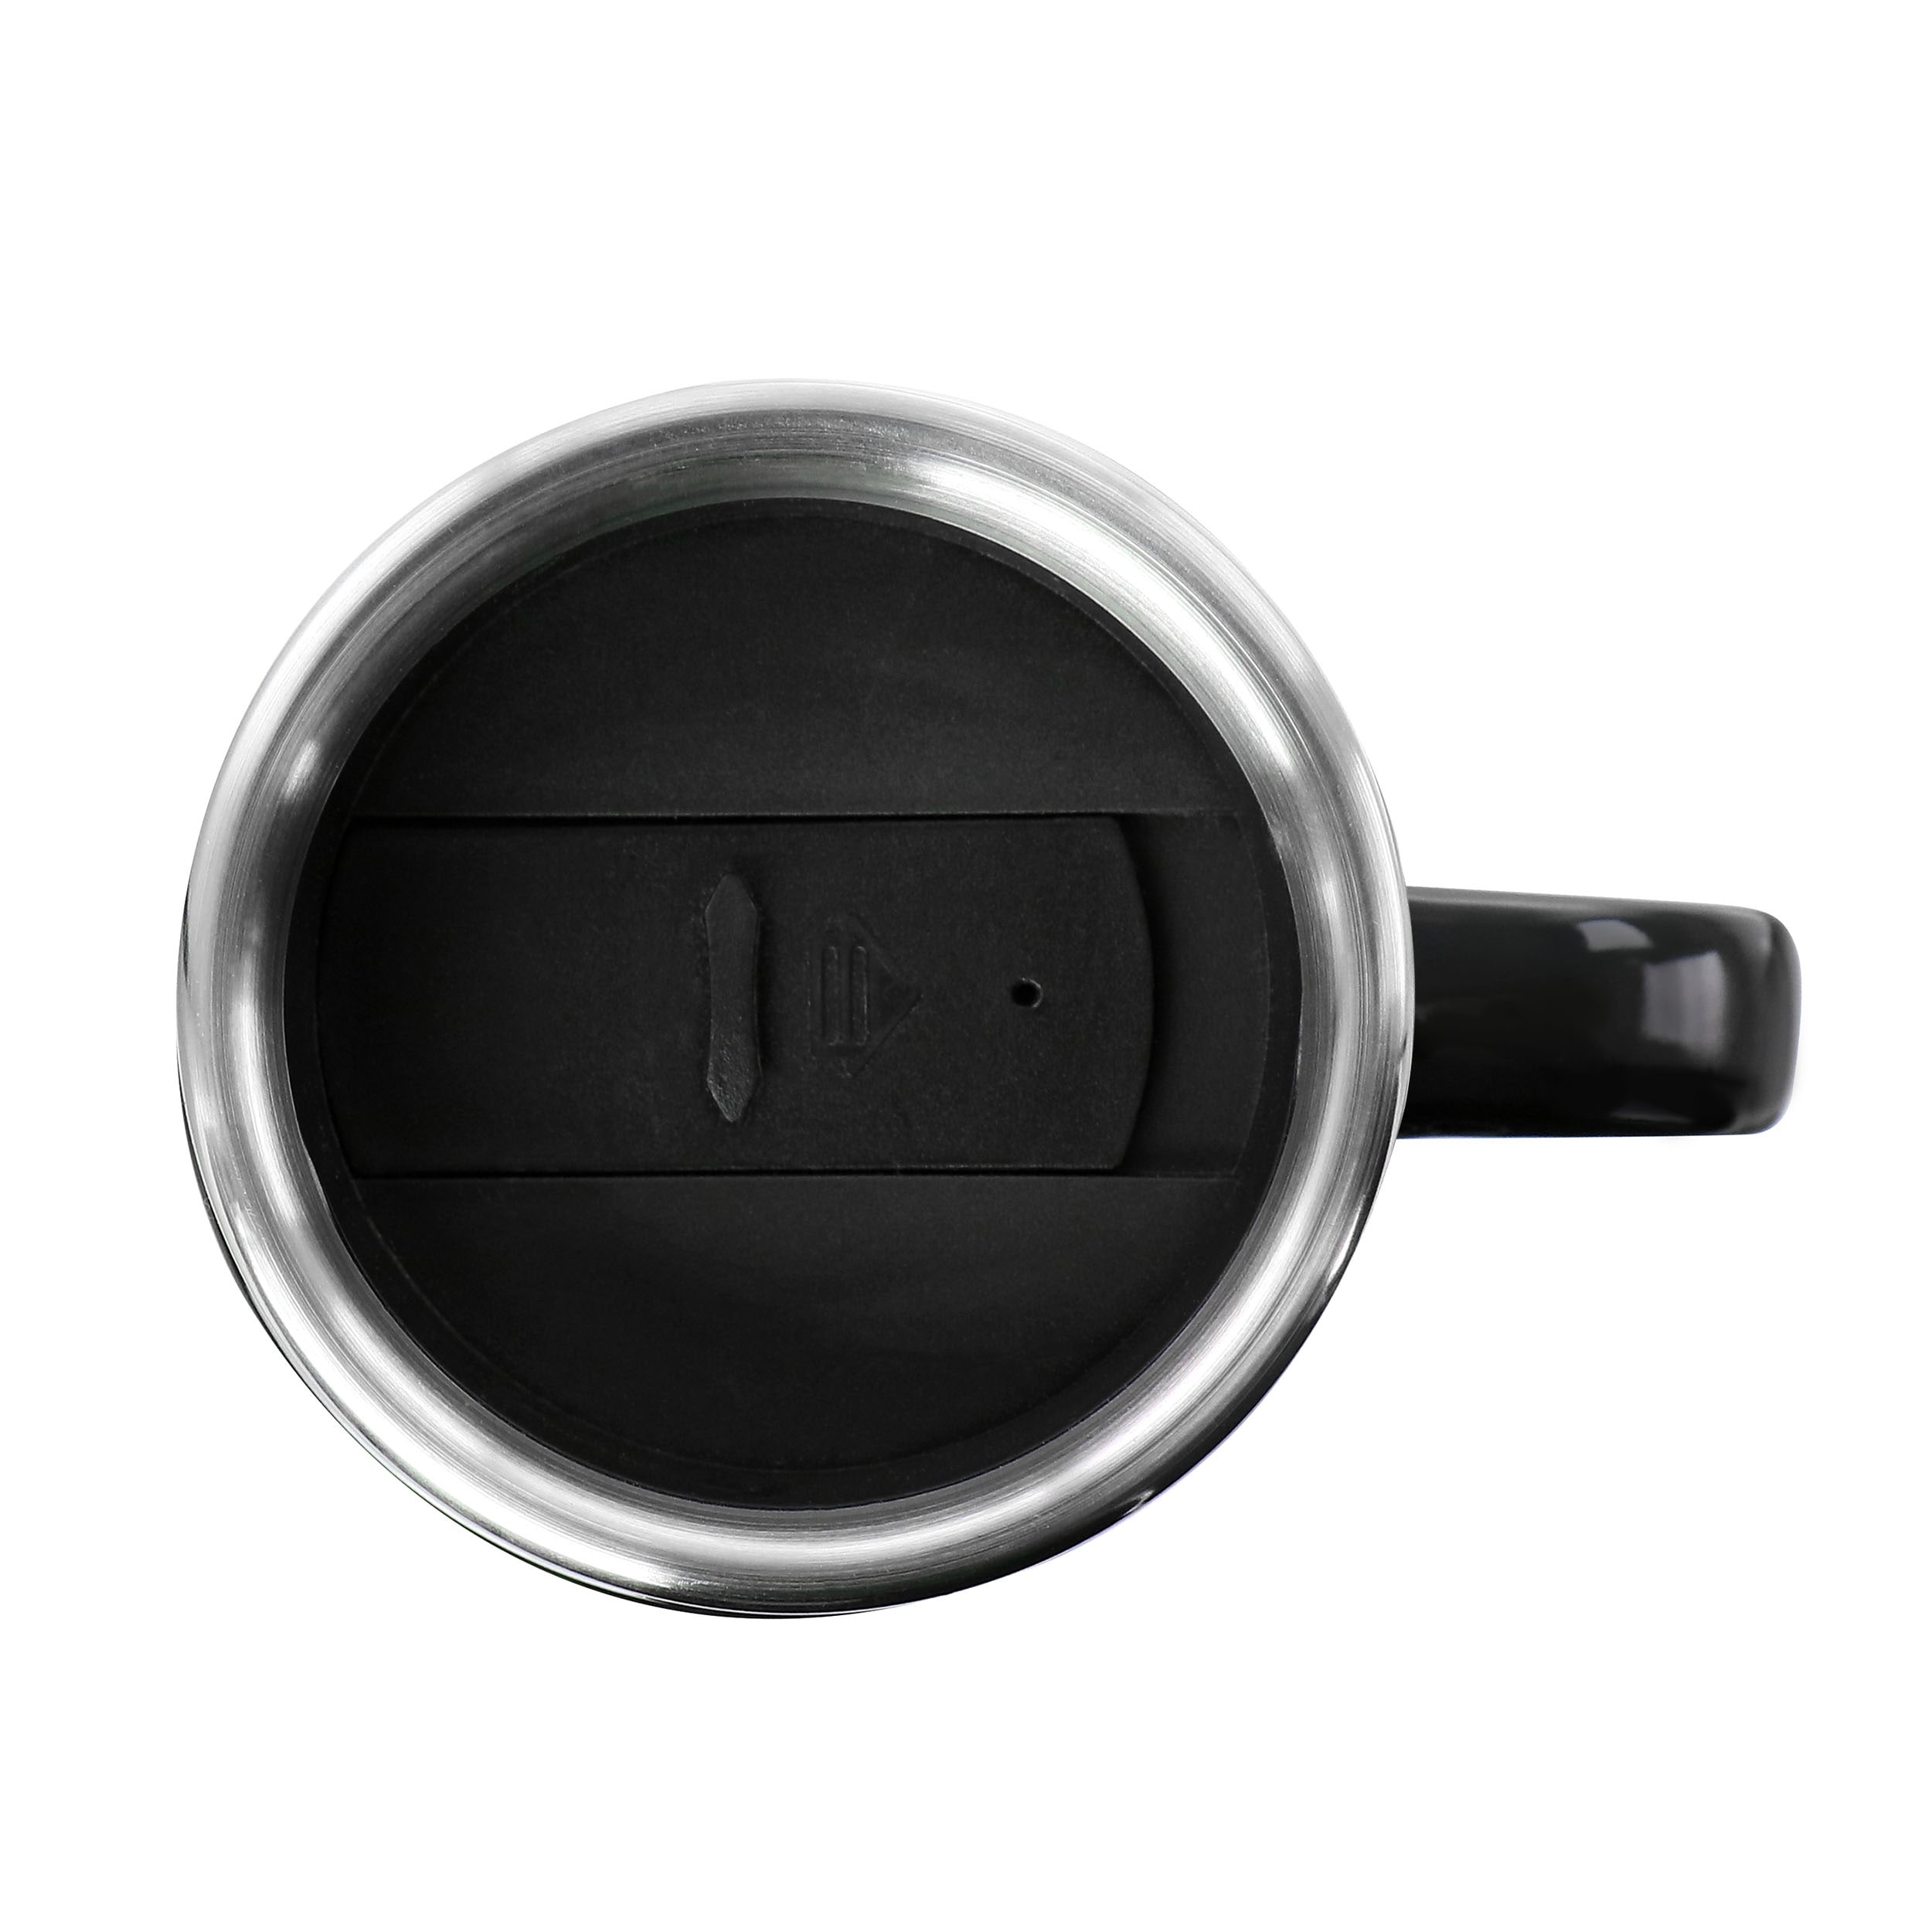 https://ak1.ostkcdn.com/images/products/is/images/direct/8782ffc8e3044dda762a398a63b9e232867b0009/Mr.-Coffee-16oz-Stainless-Steel-and-Stoneware-Travel-Mug.jpg